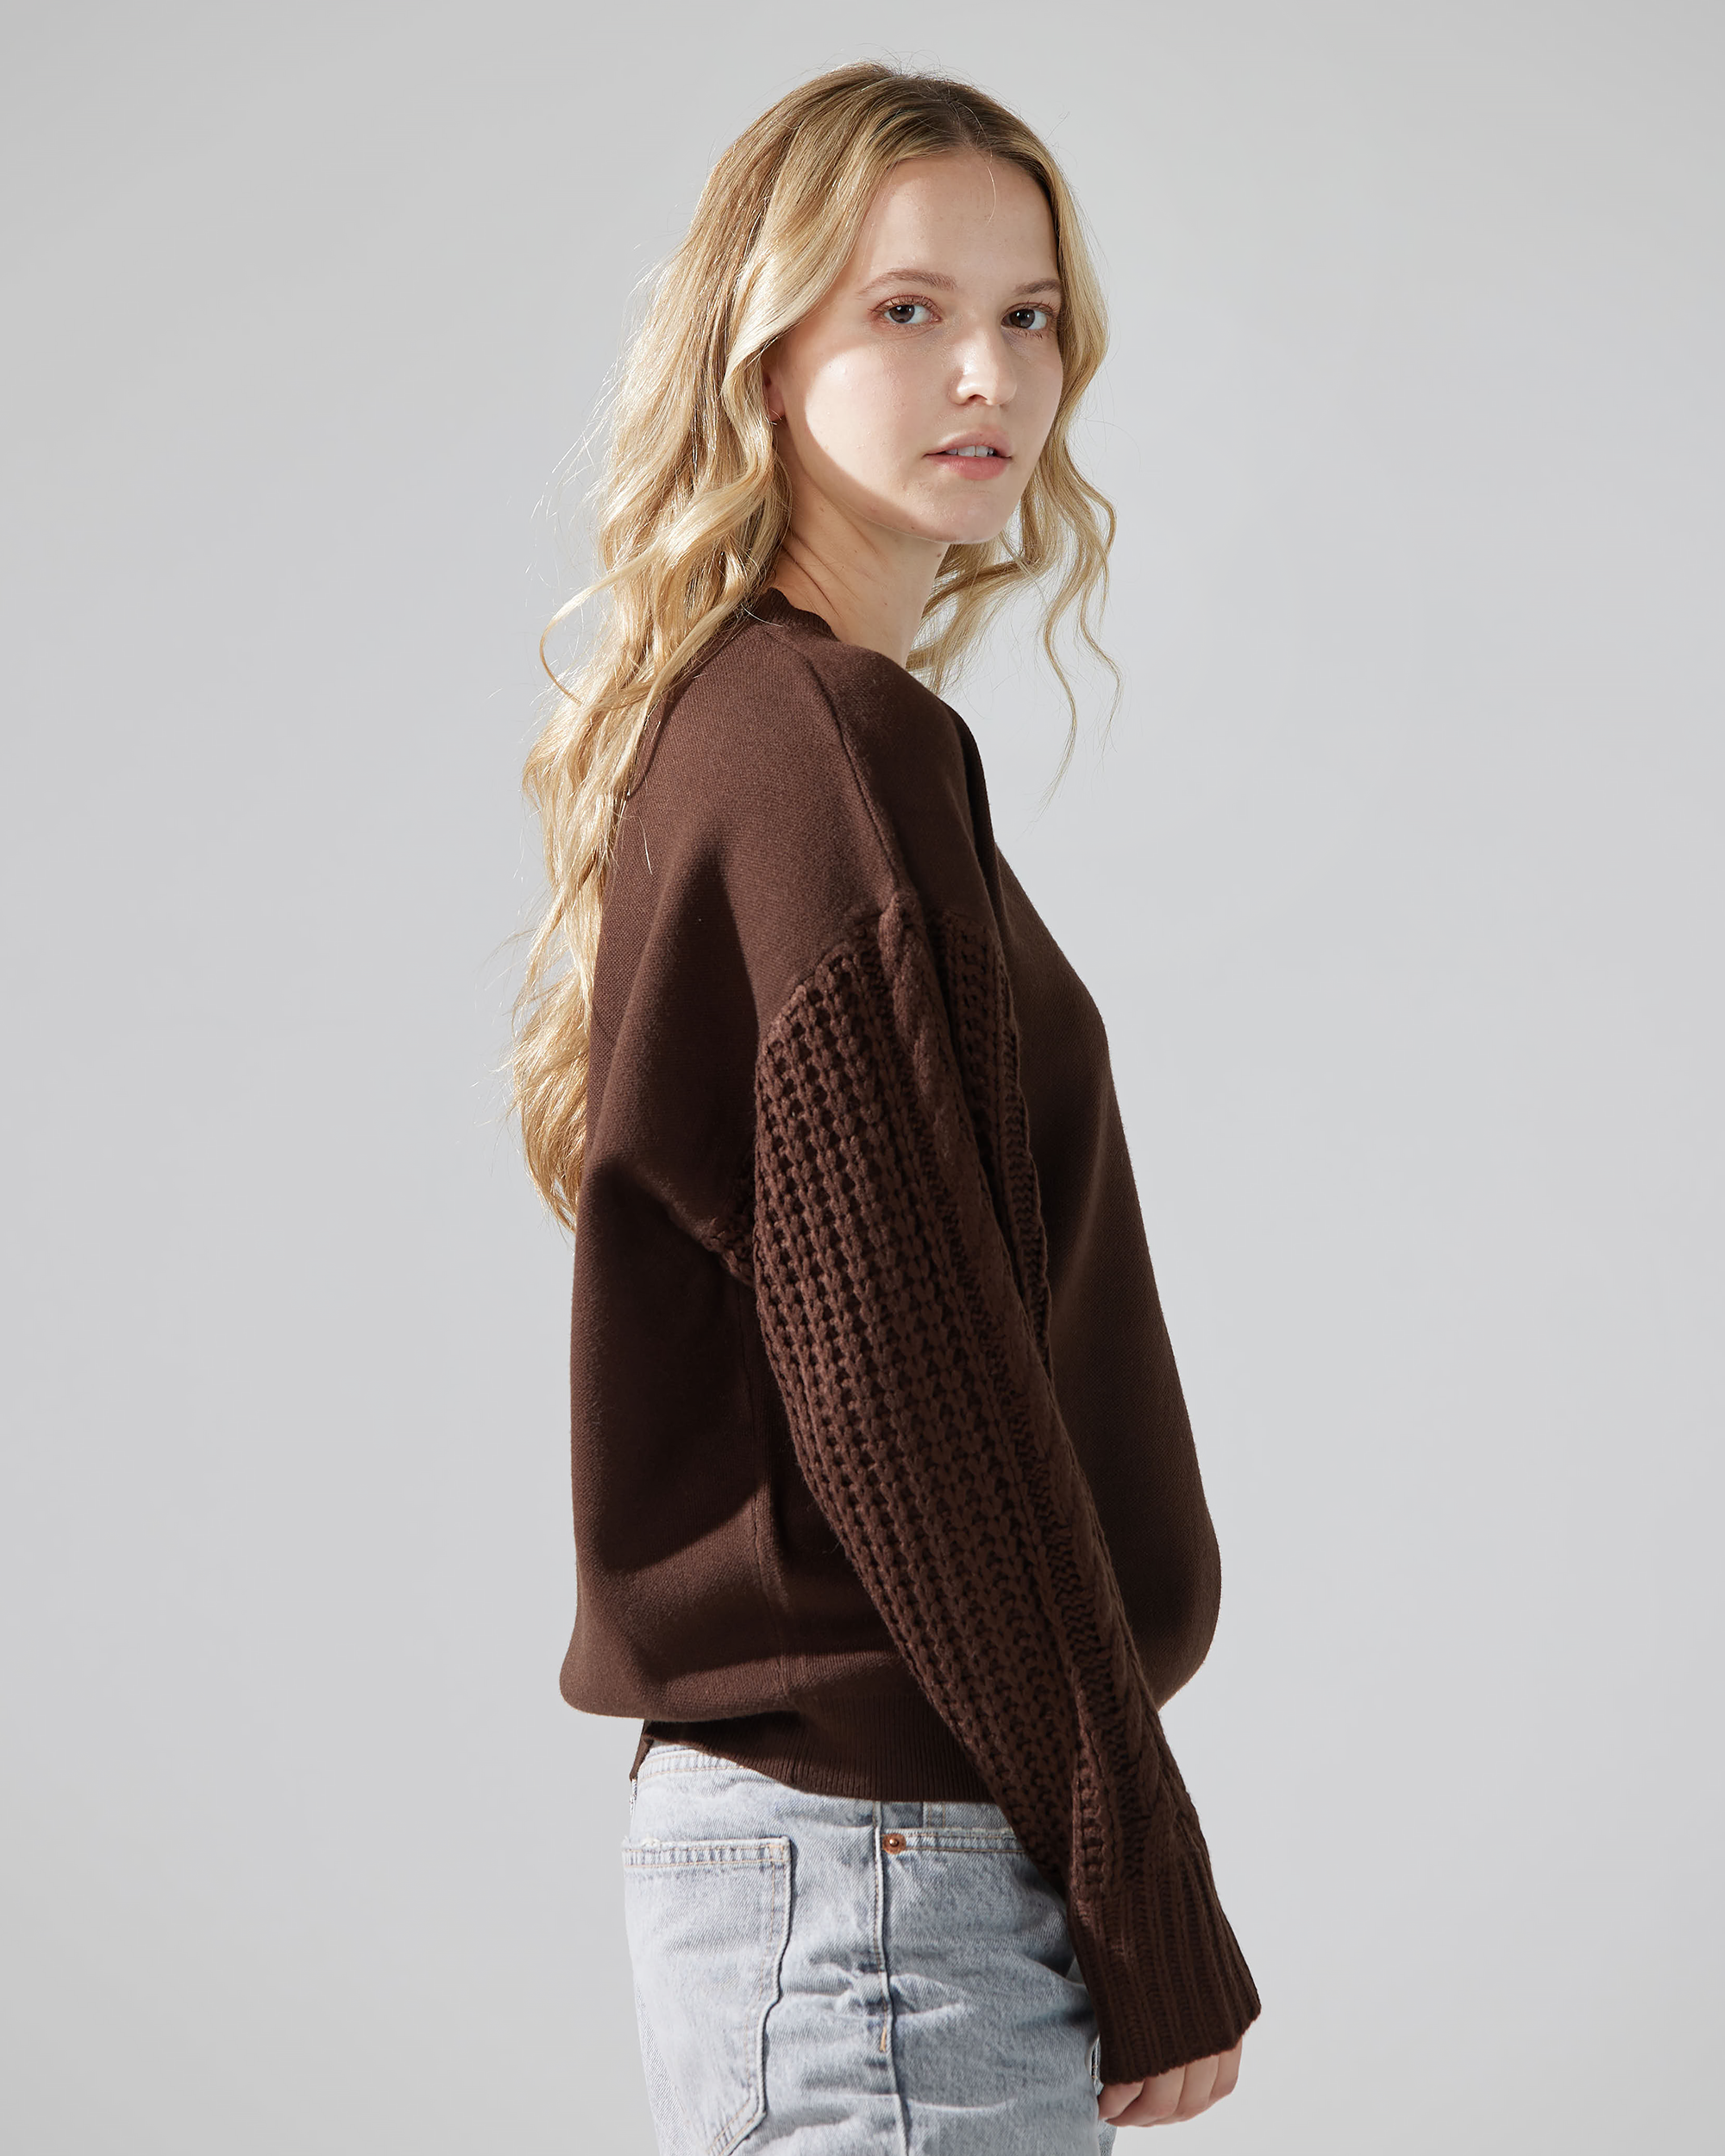 Chocolate Cable Knit Sweater: Warm & Luxurious